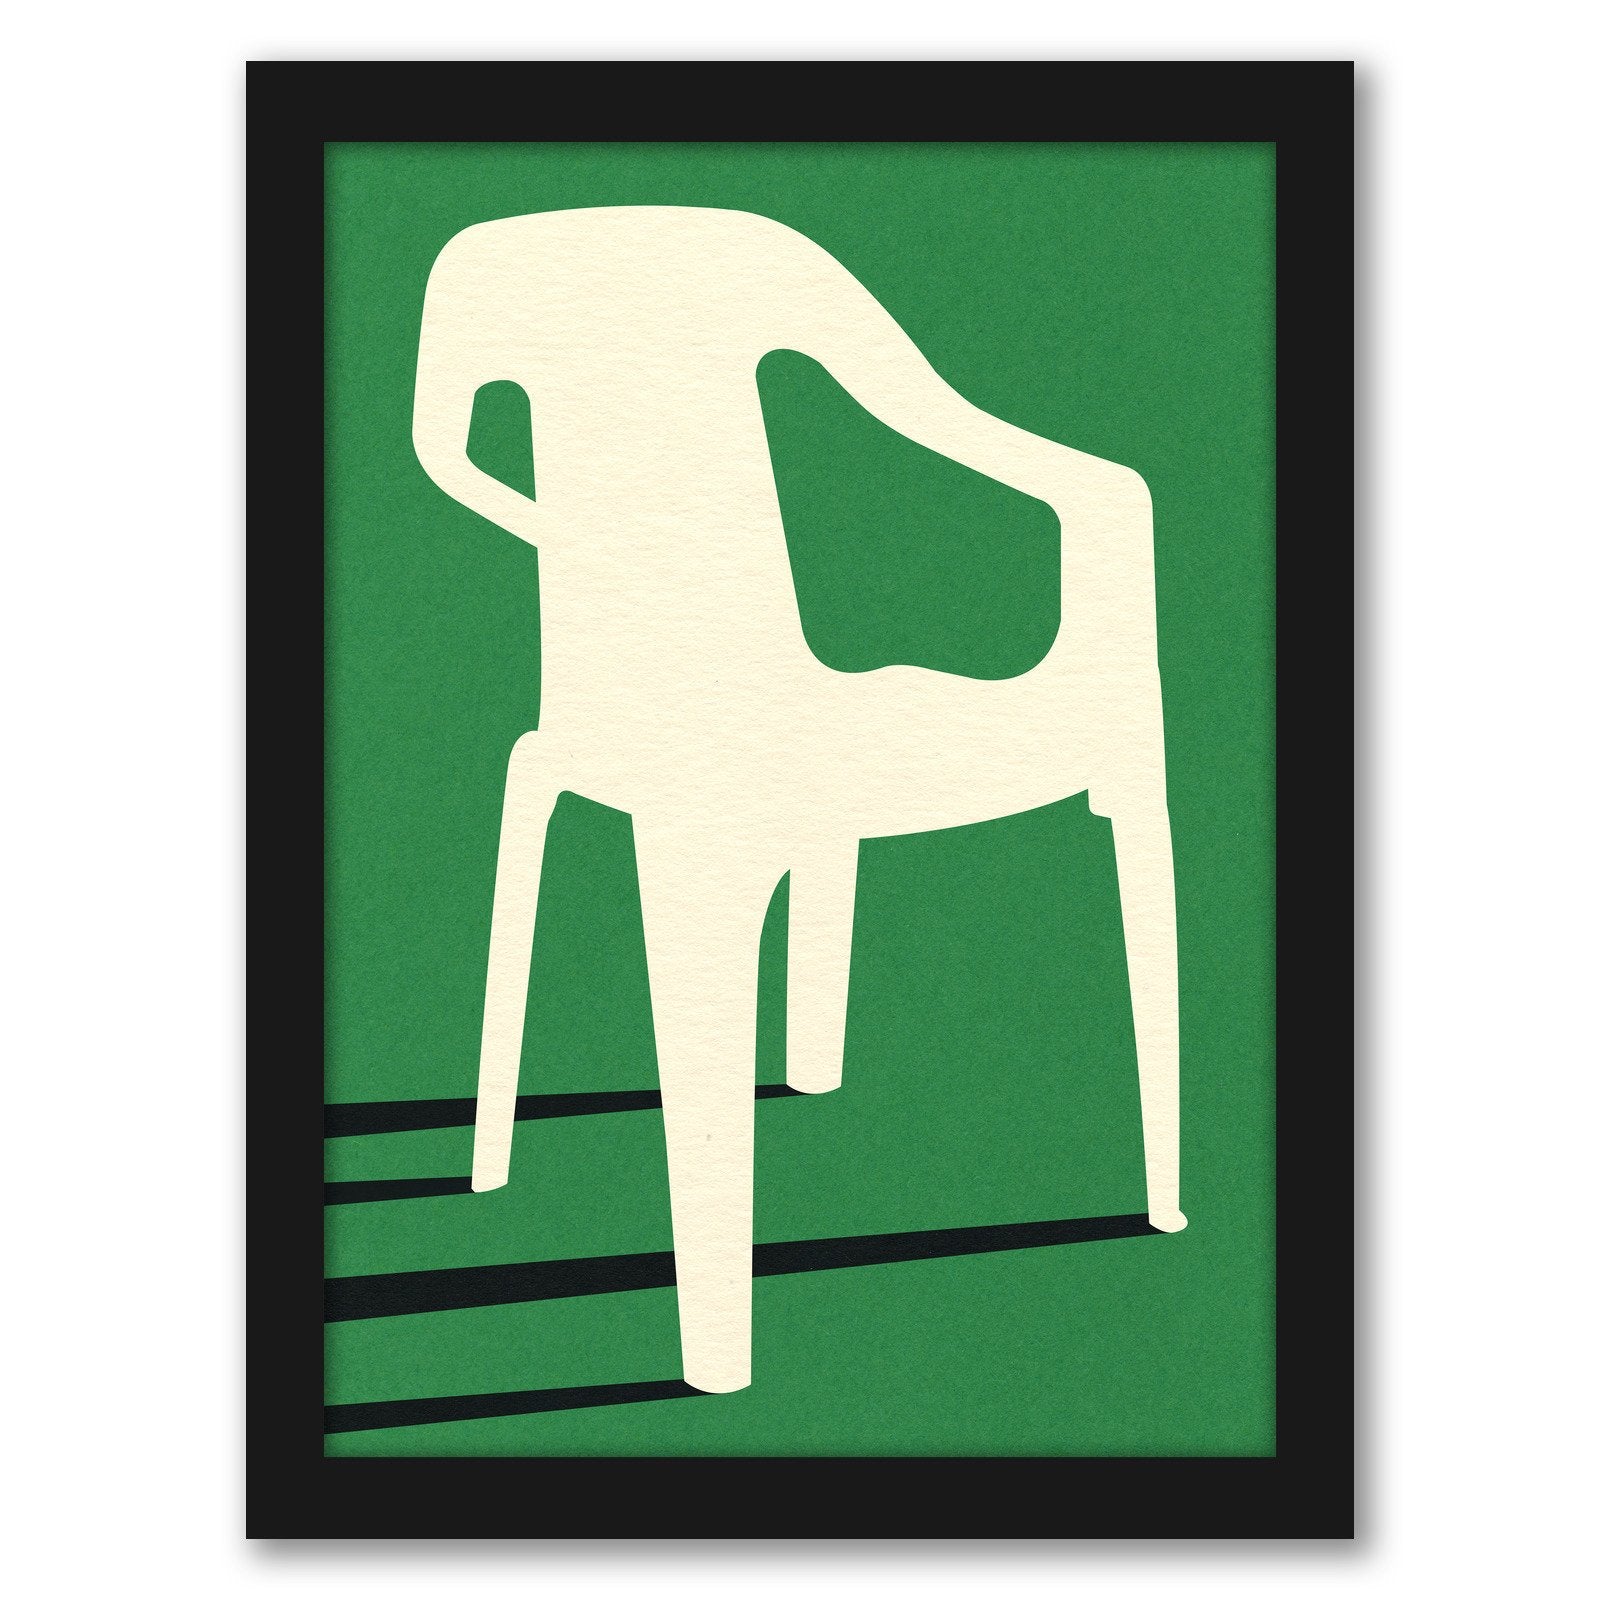 Monobloc Plastic Chair No Iii by Rosi Feist - Framed Print - Americanflat